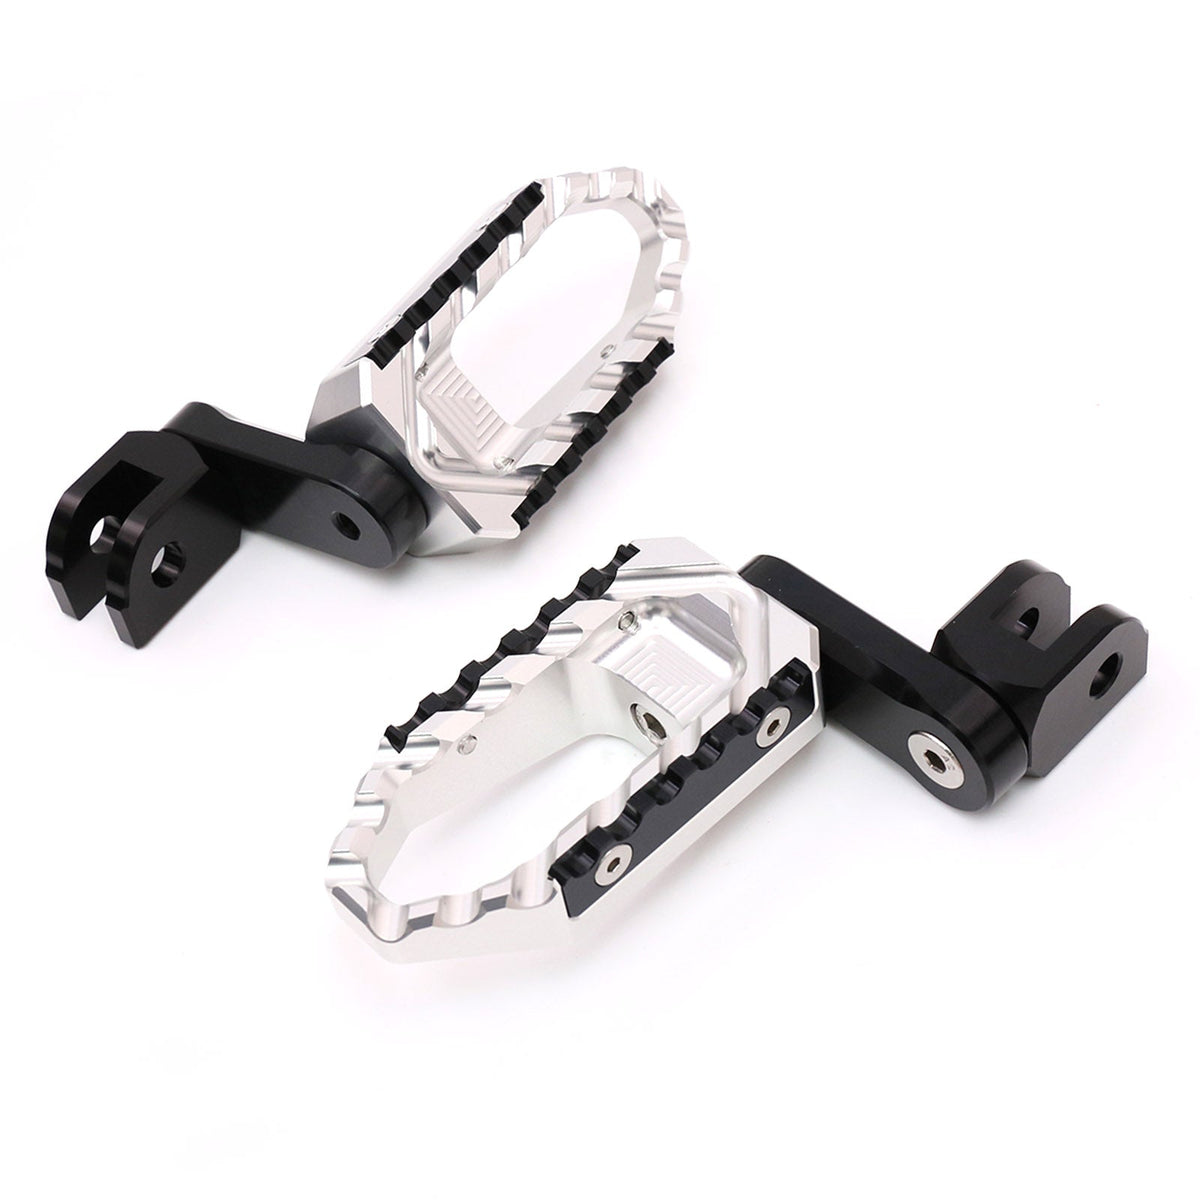 Fit Razor RSF350 RSF650 Touring 40mm 1.5 inch Adjustable Extended Extension Lowering Lower Front Foot Pegs Footpegs Electric Dirt Bike MC Motoparts